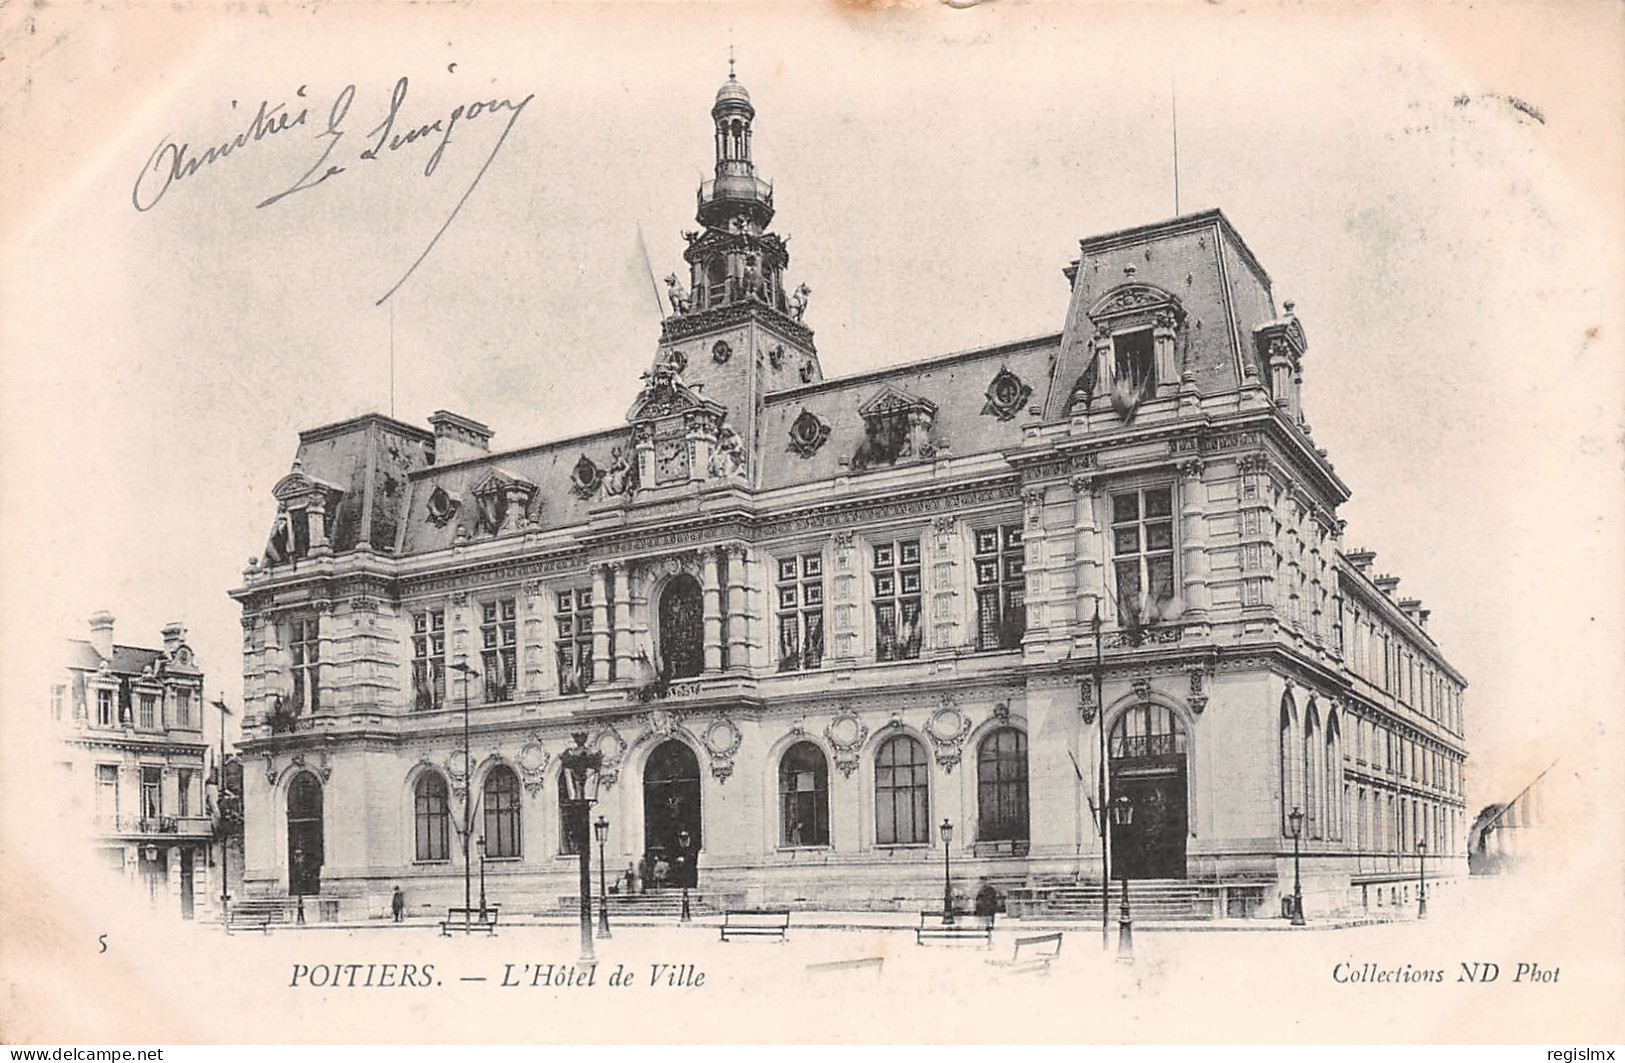 86-POITIERS-N°T1168-B/0189 - Poitiers